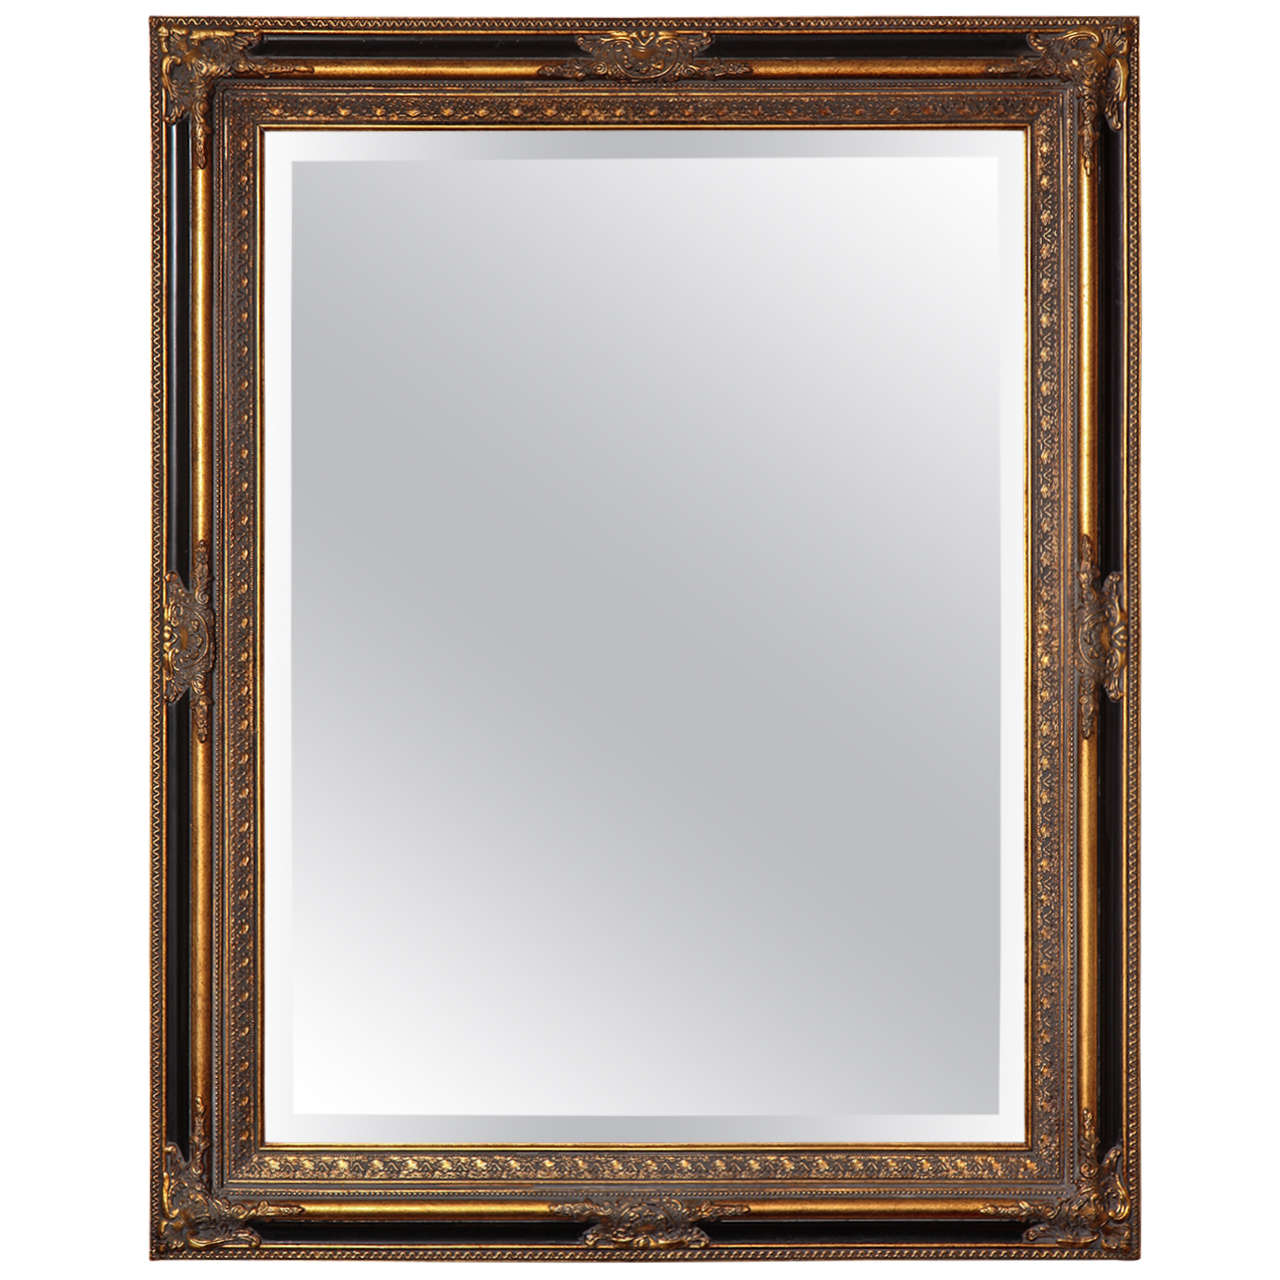 Neoclassical Rectangular Mirror in Empire Revival Style